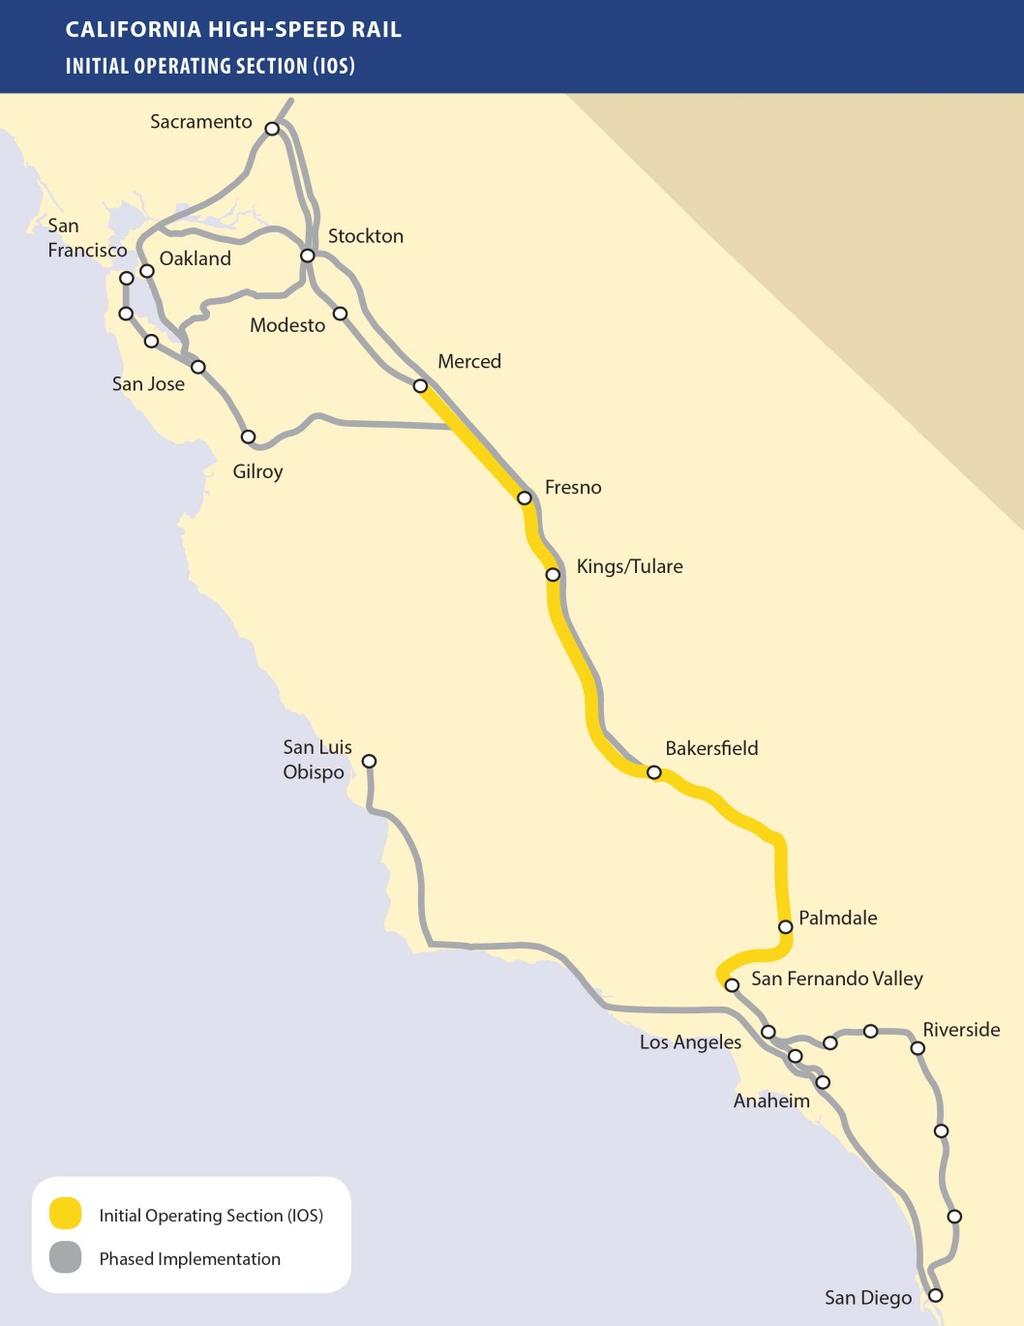 INITIAL OPERATING SECTION (IOS) Central Valley to San Fernando